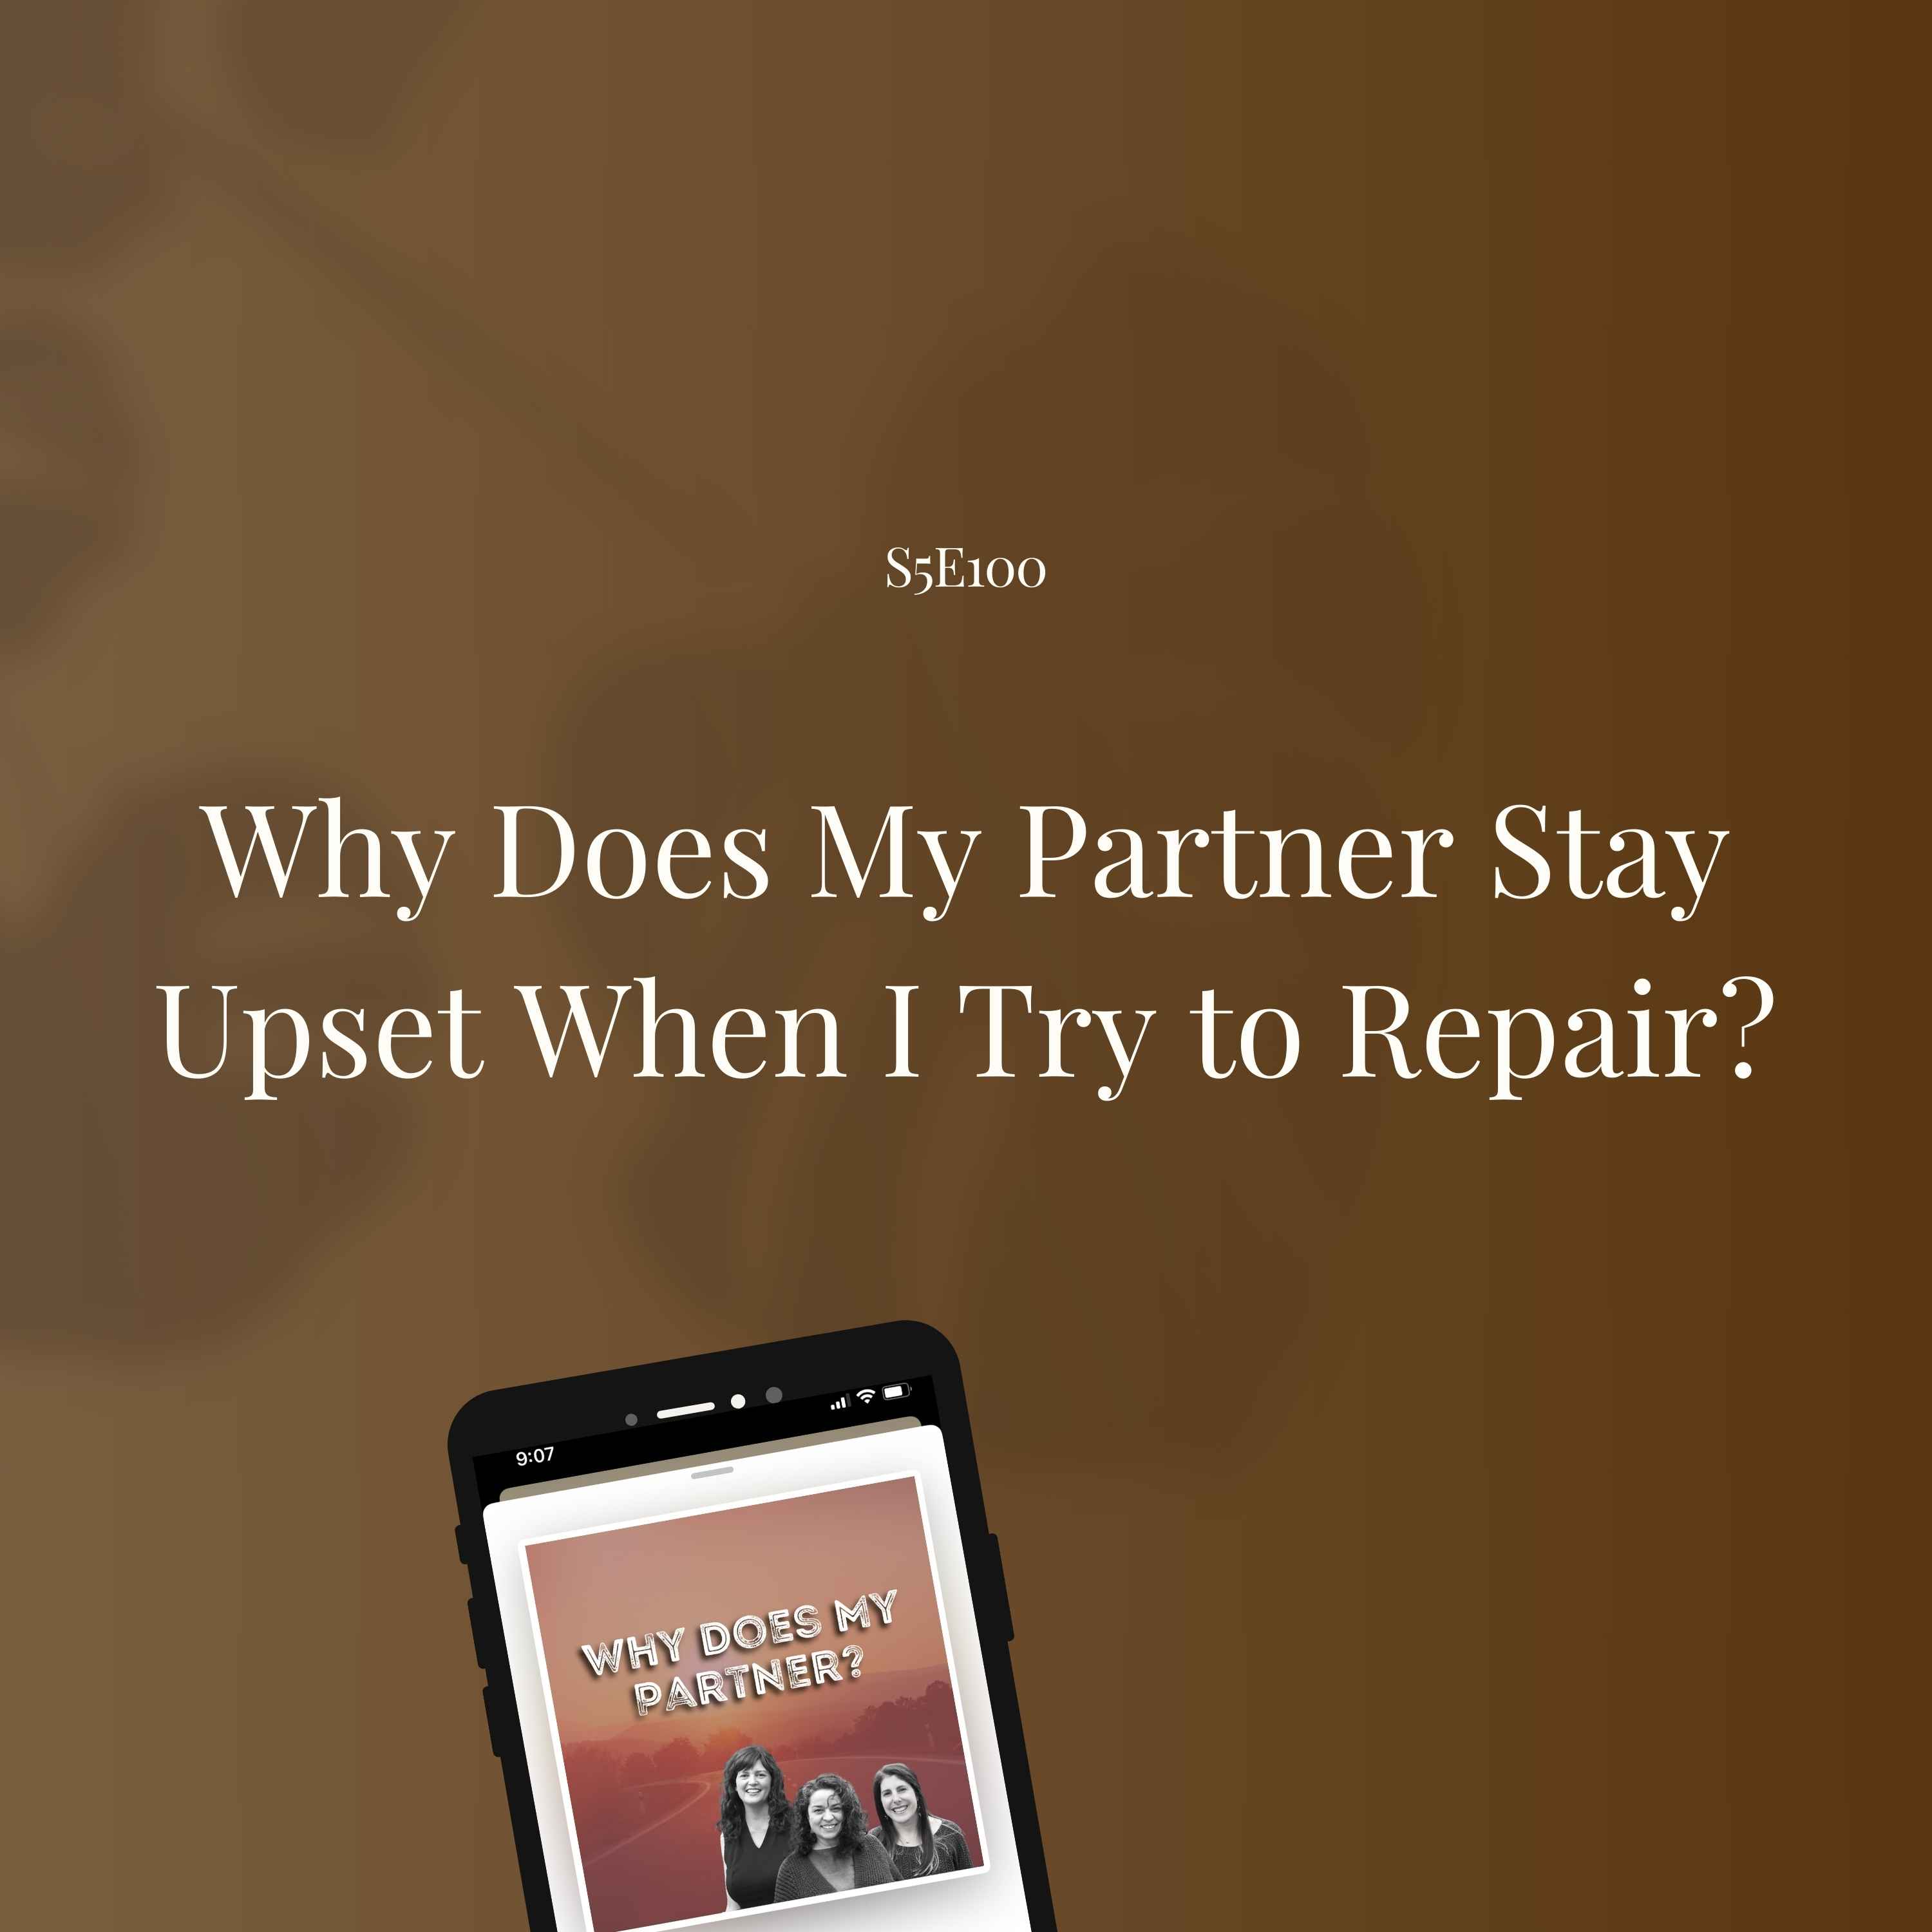 Stay Upset When I Try to Repair?